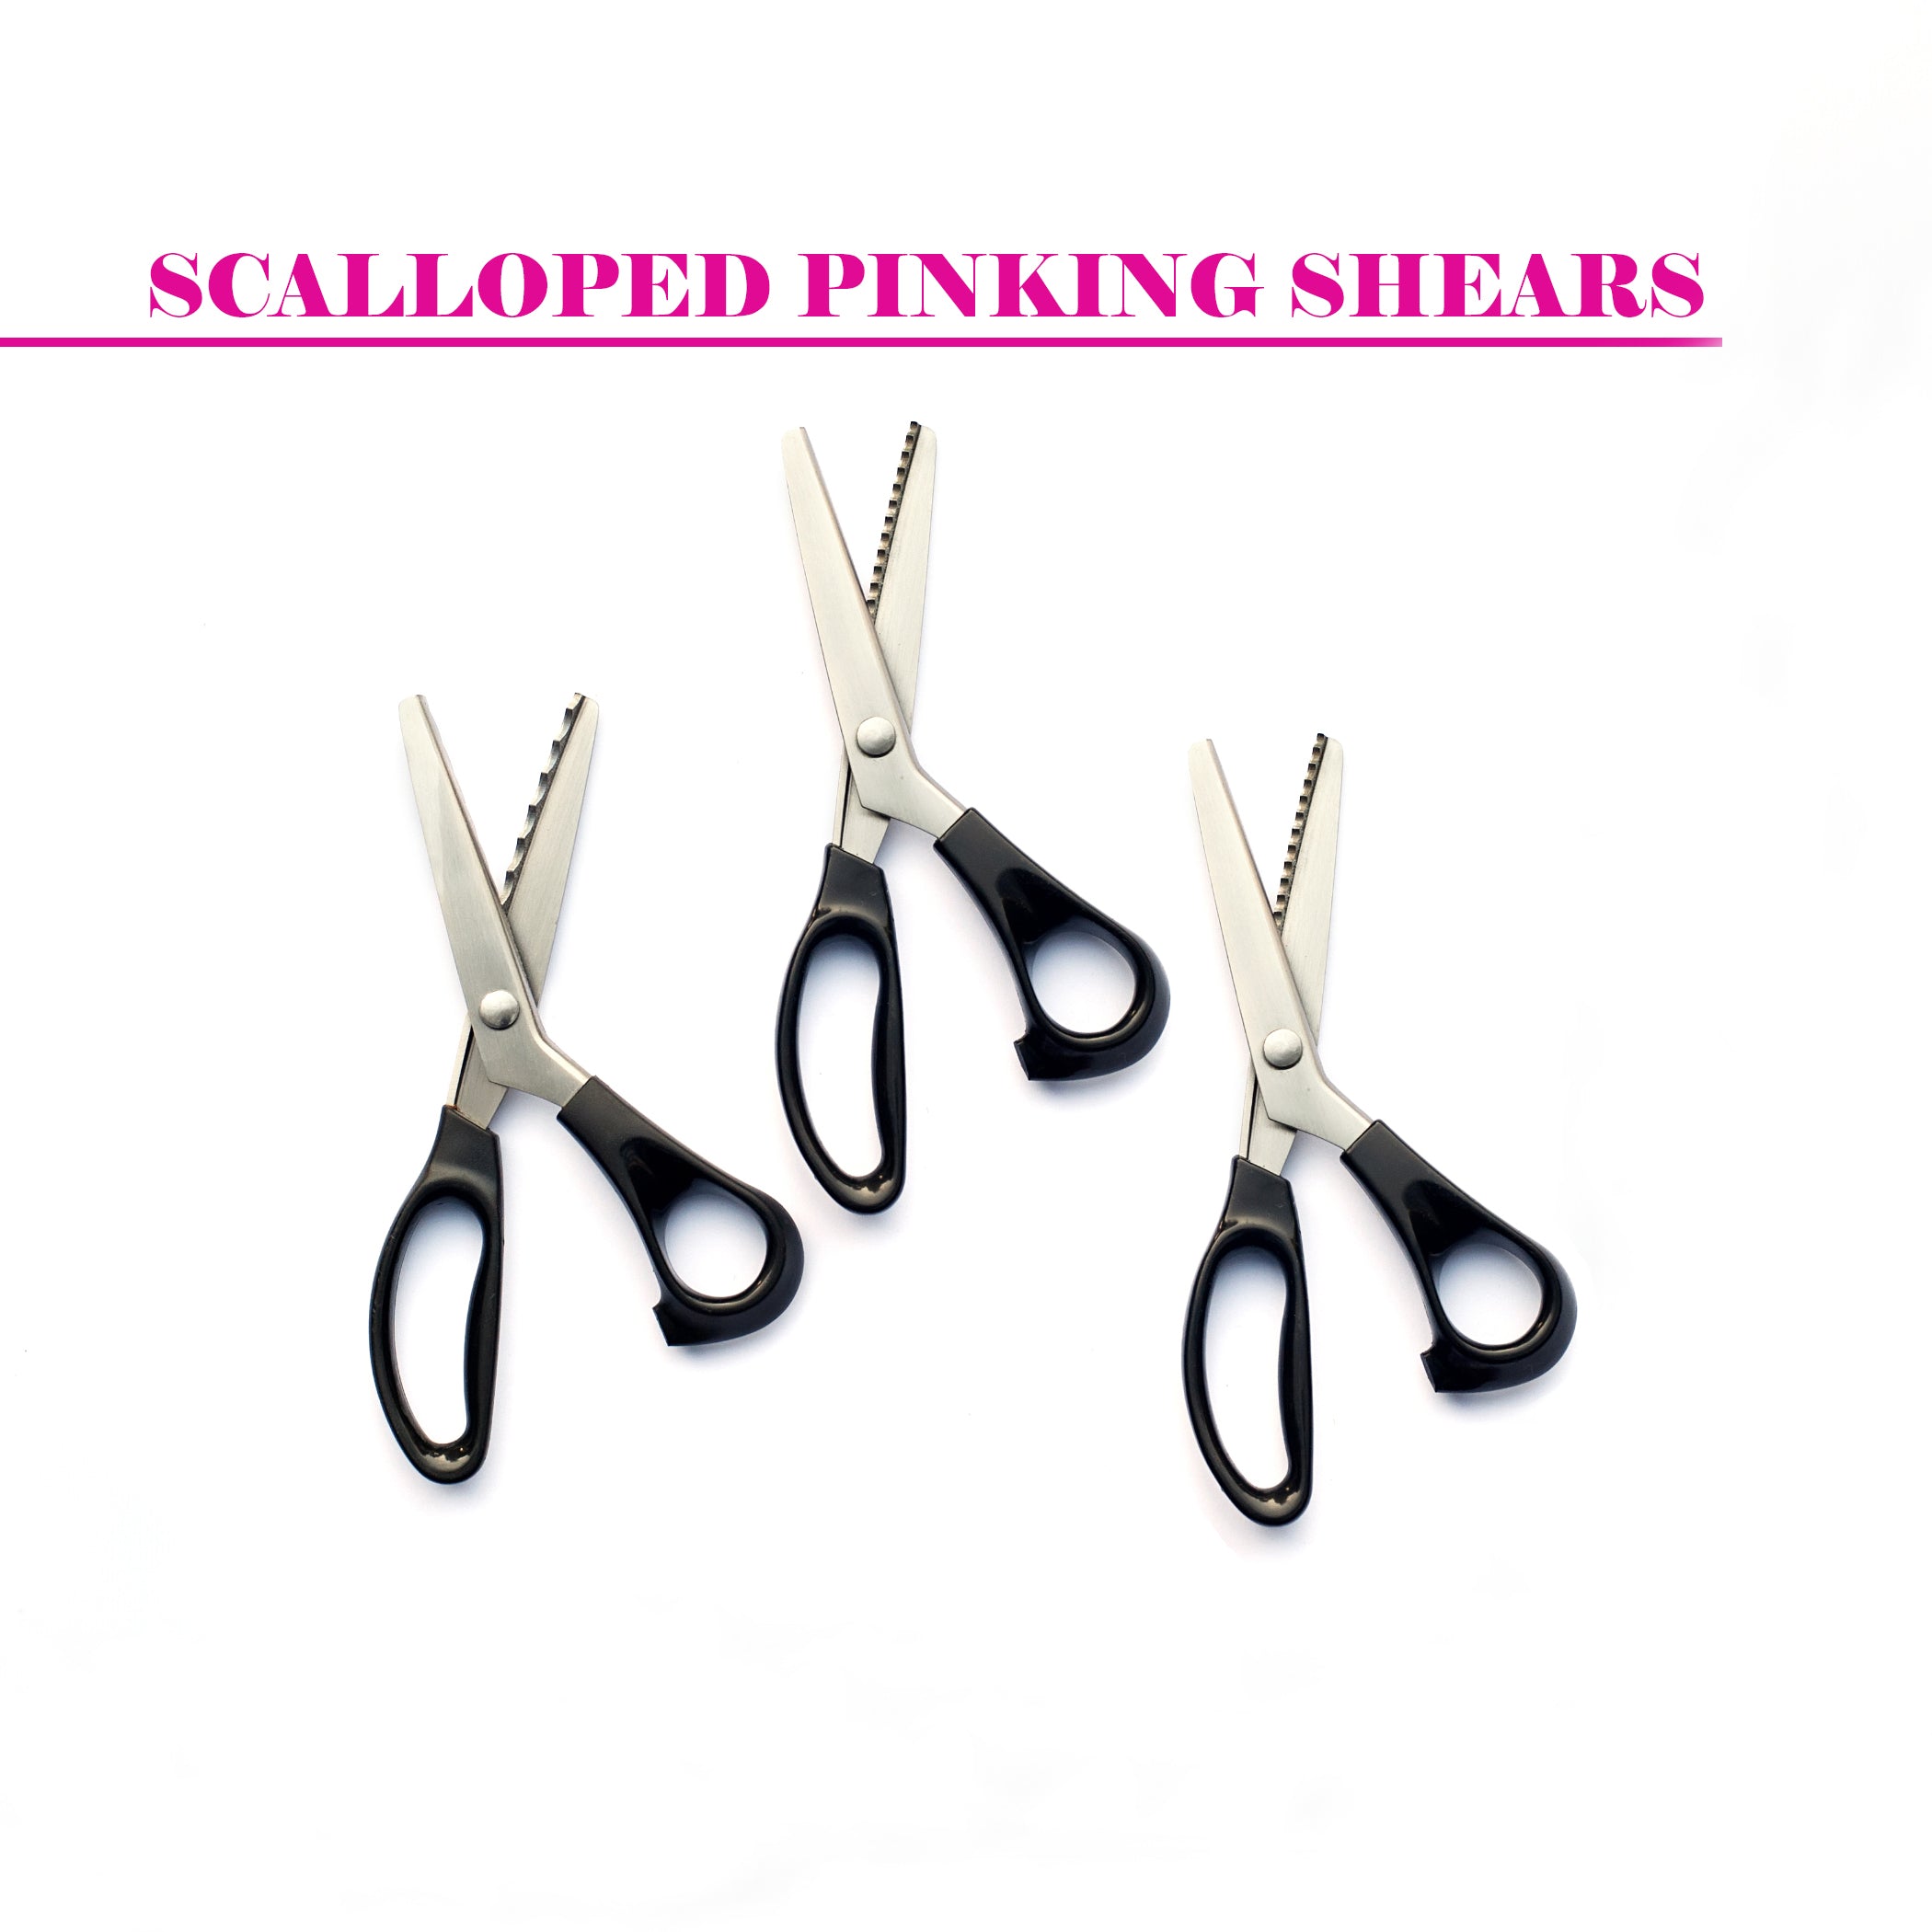 Snip, snip! Our scallop edged scissors are back in stock and this